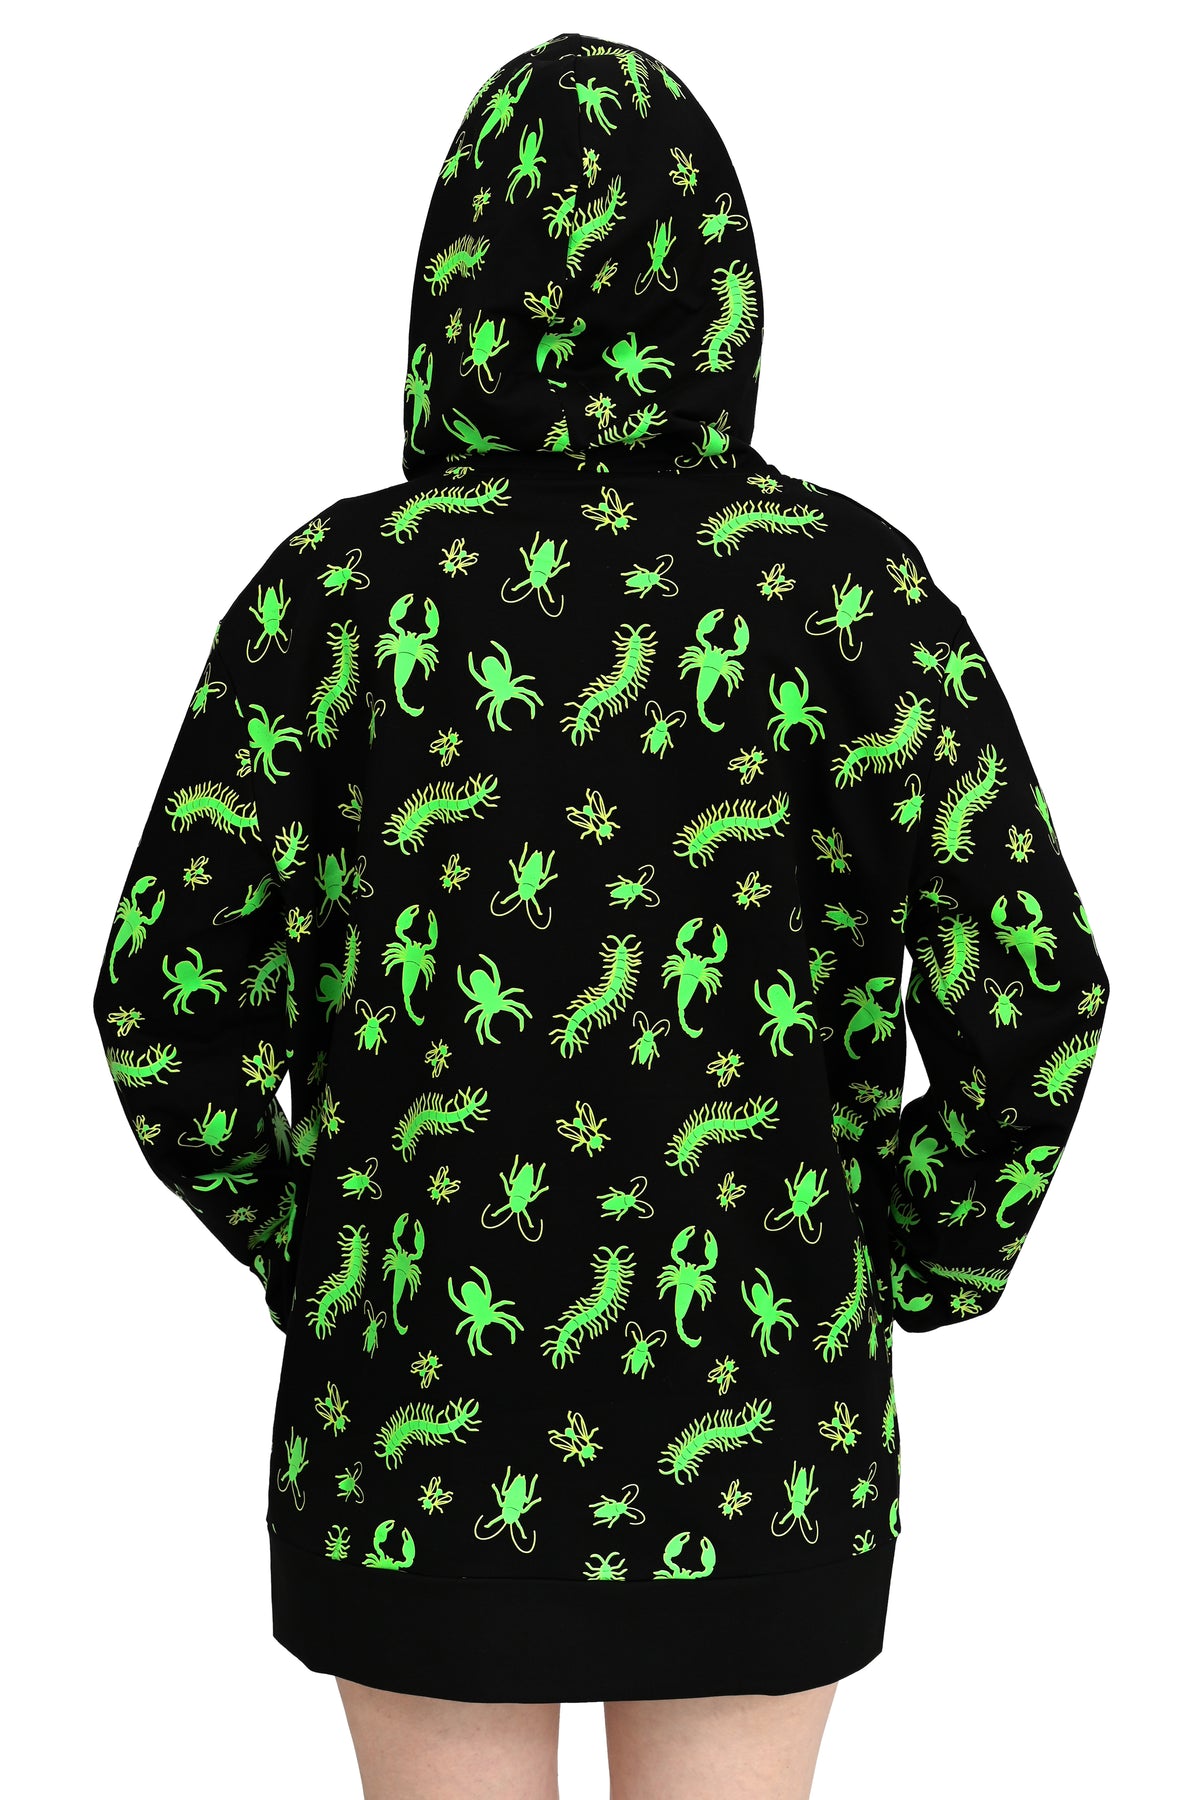 black zip up hoodie with with green glow in the dark bug print